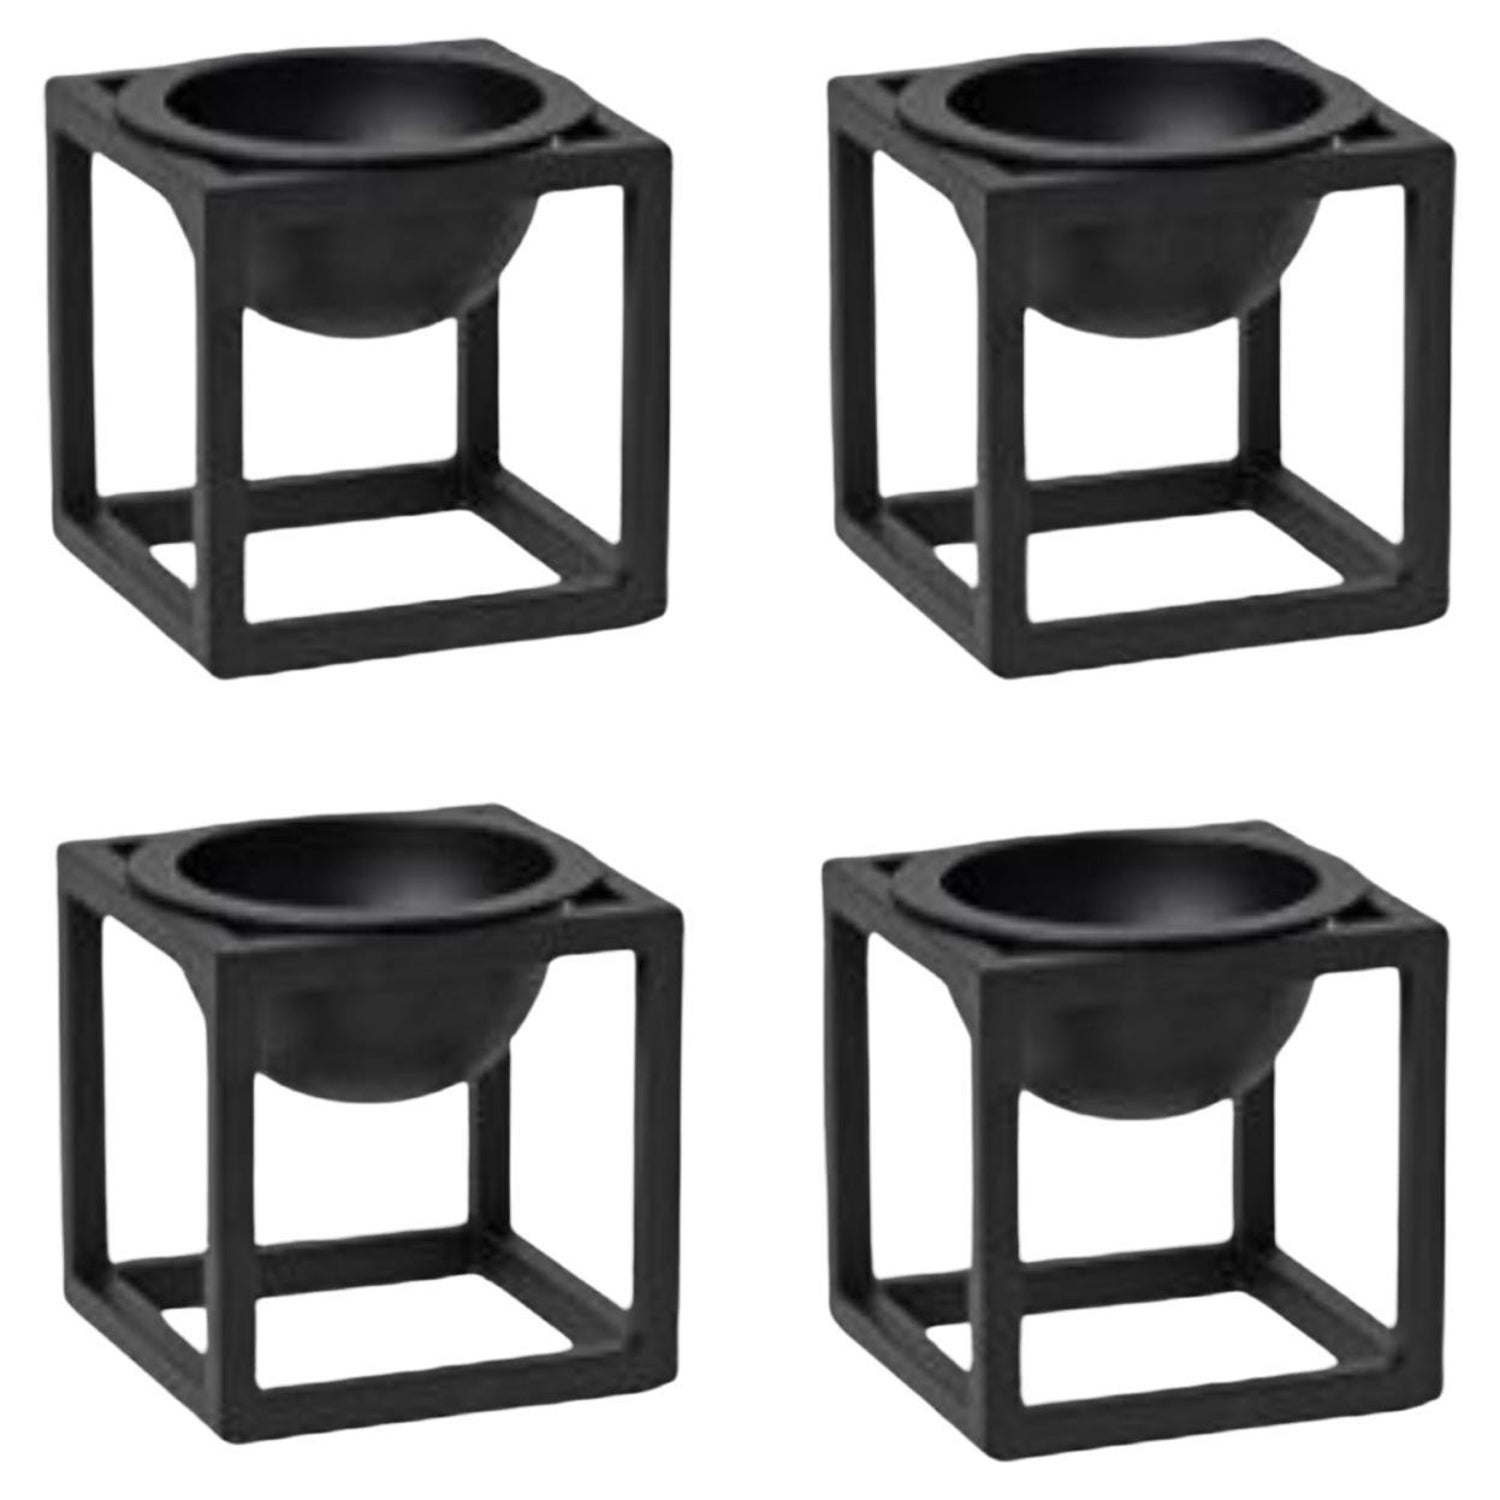 Set of 4 Black Mini Kubus Bowls by Lassen For Sale at 1stDibs